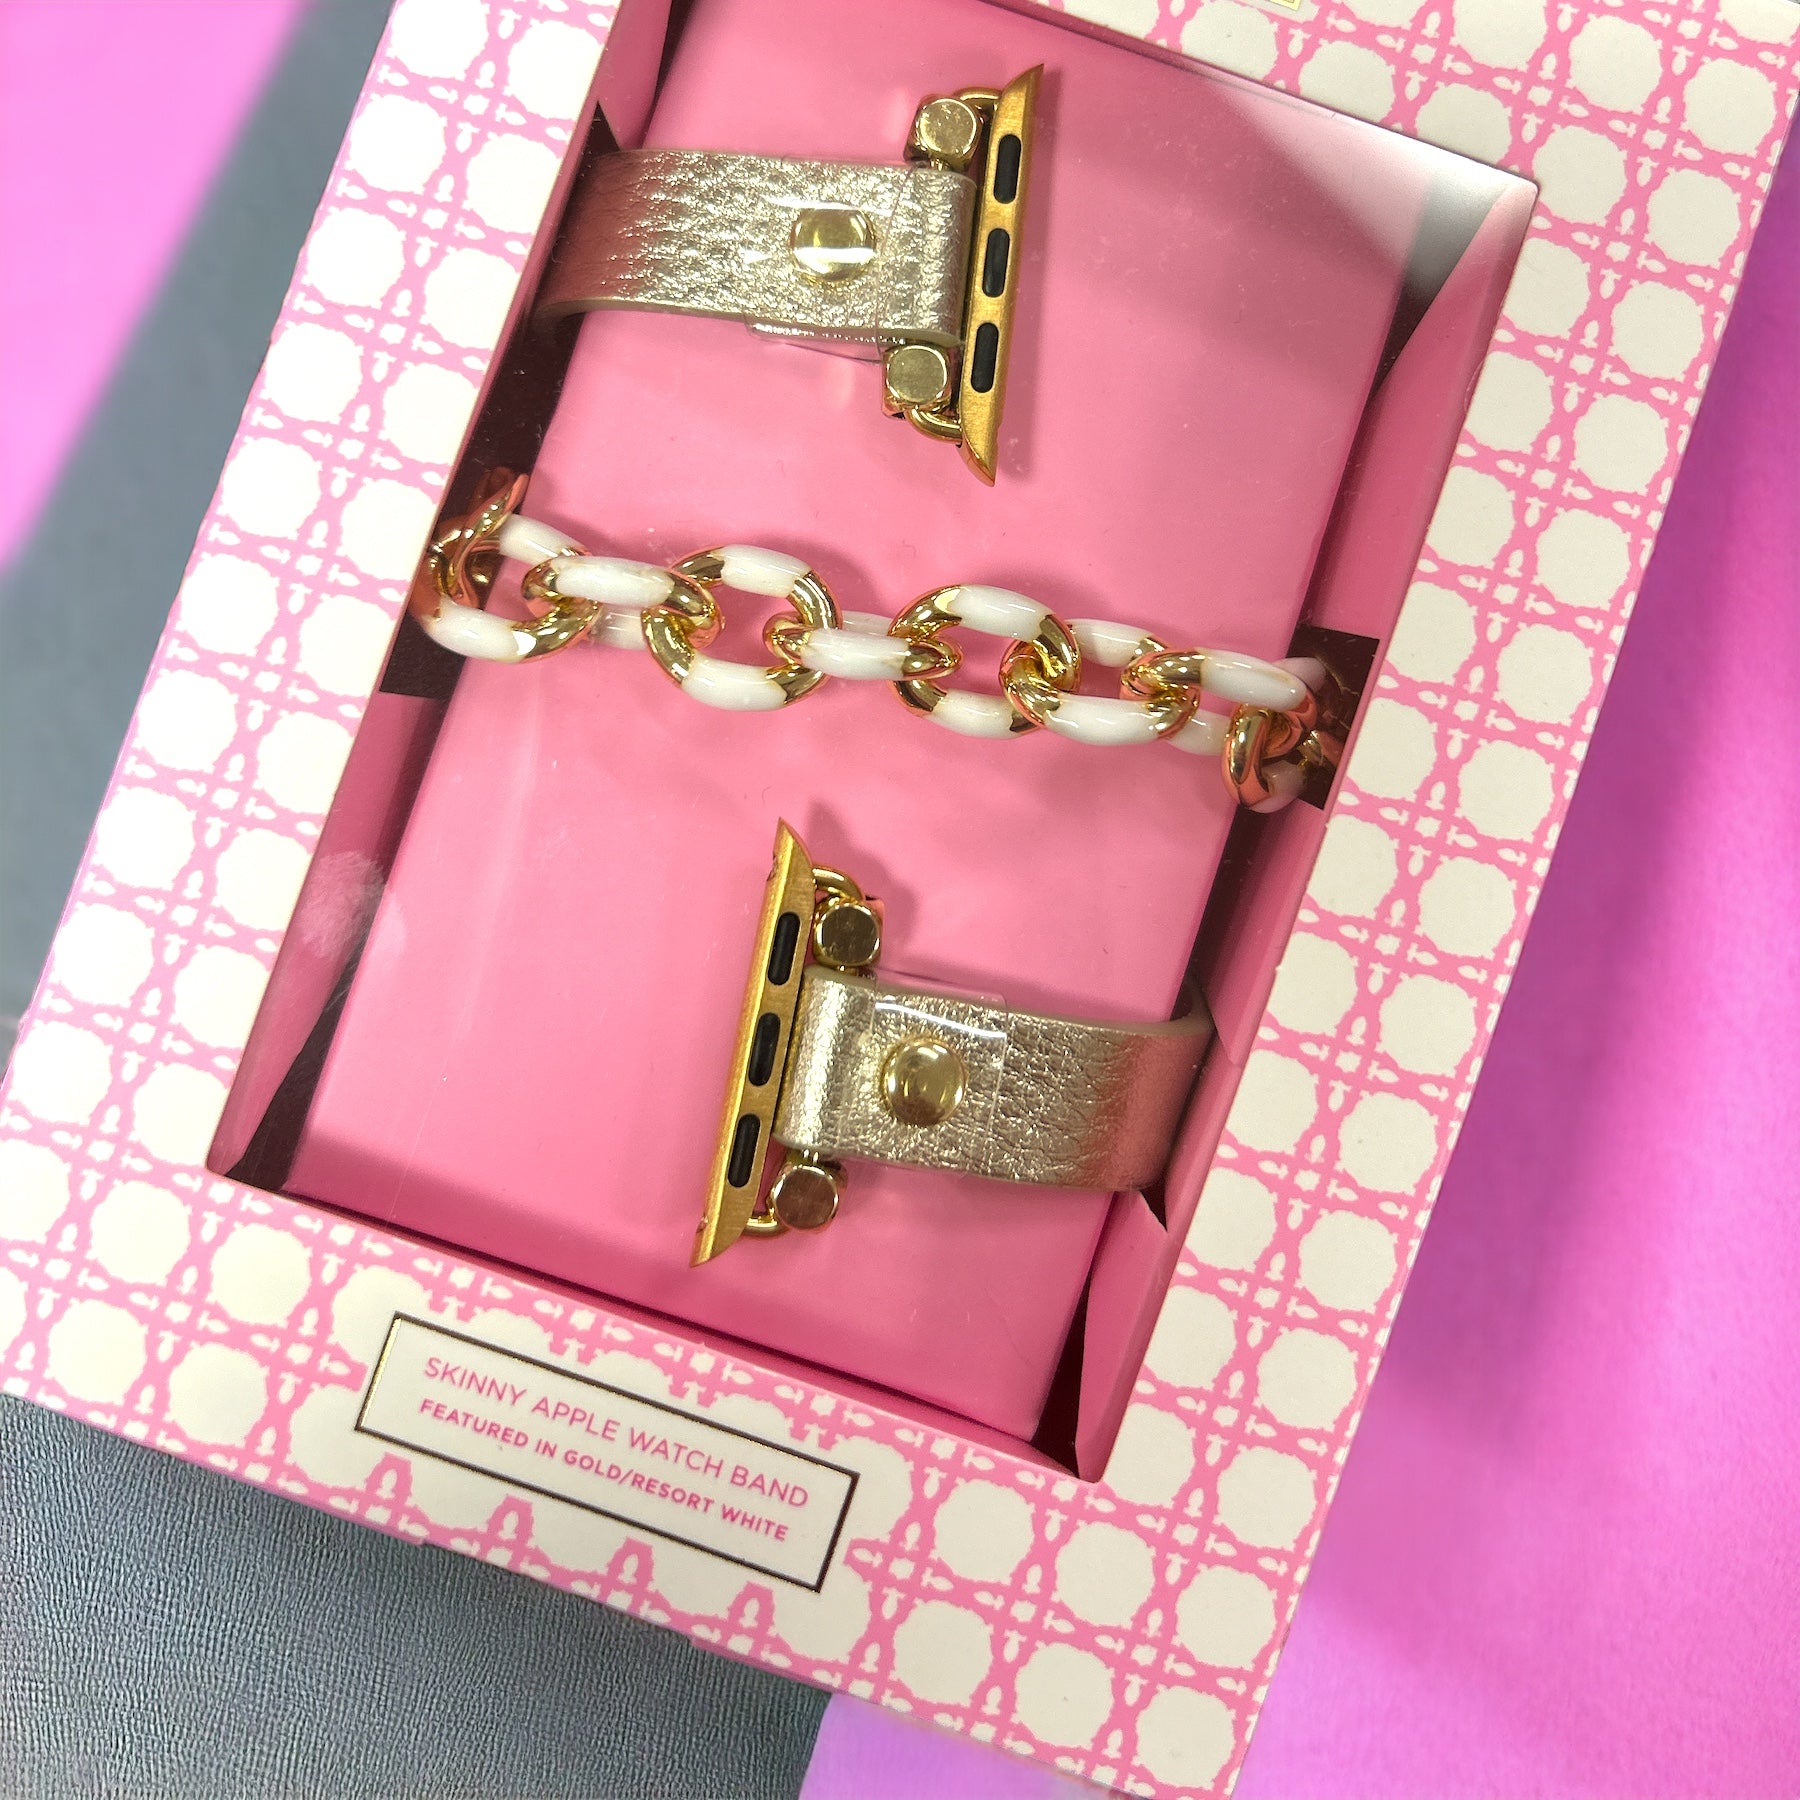 Lilly Pulitzer Skinny Apple Watch Band Gold